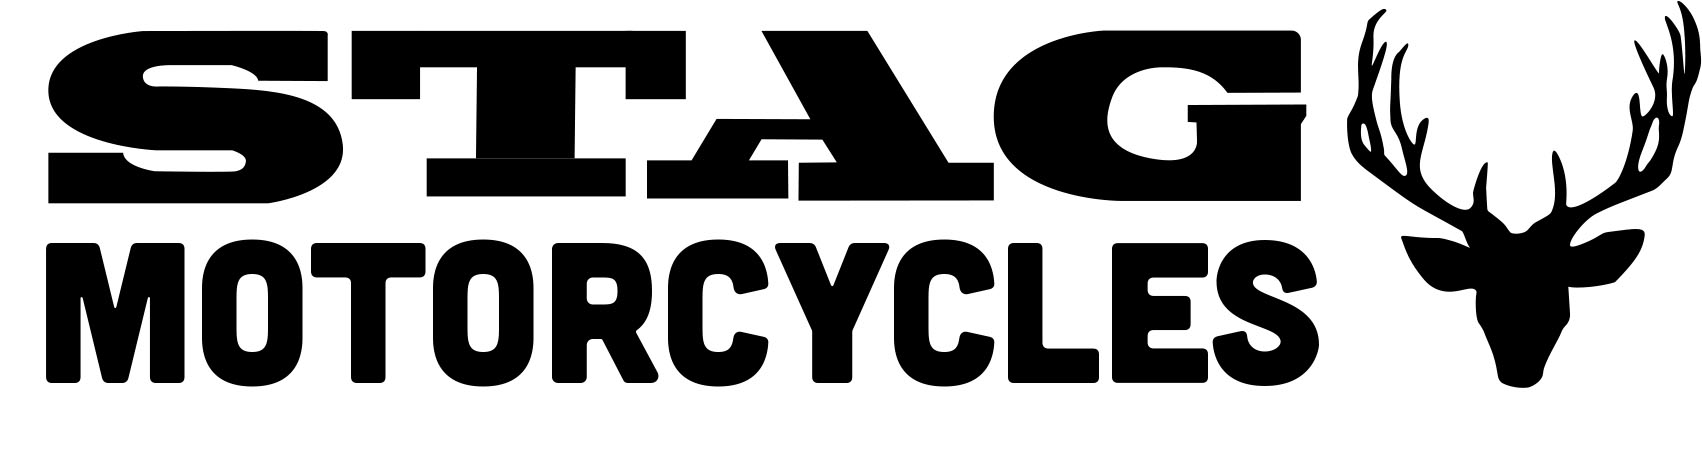 stag motorcycles logo